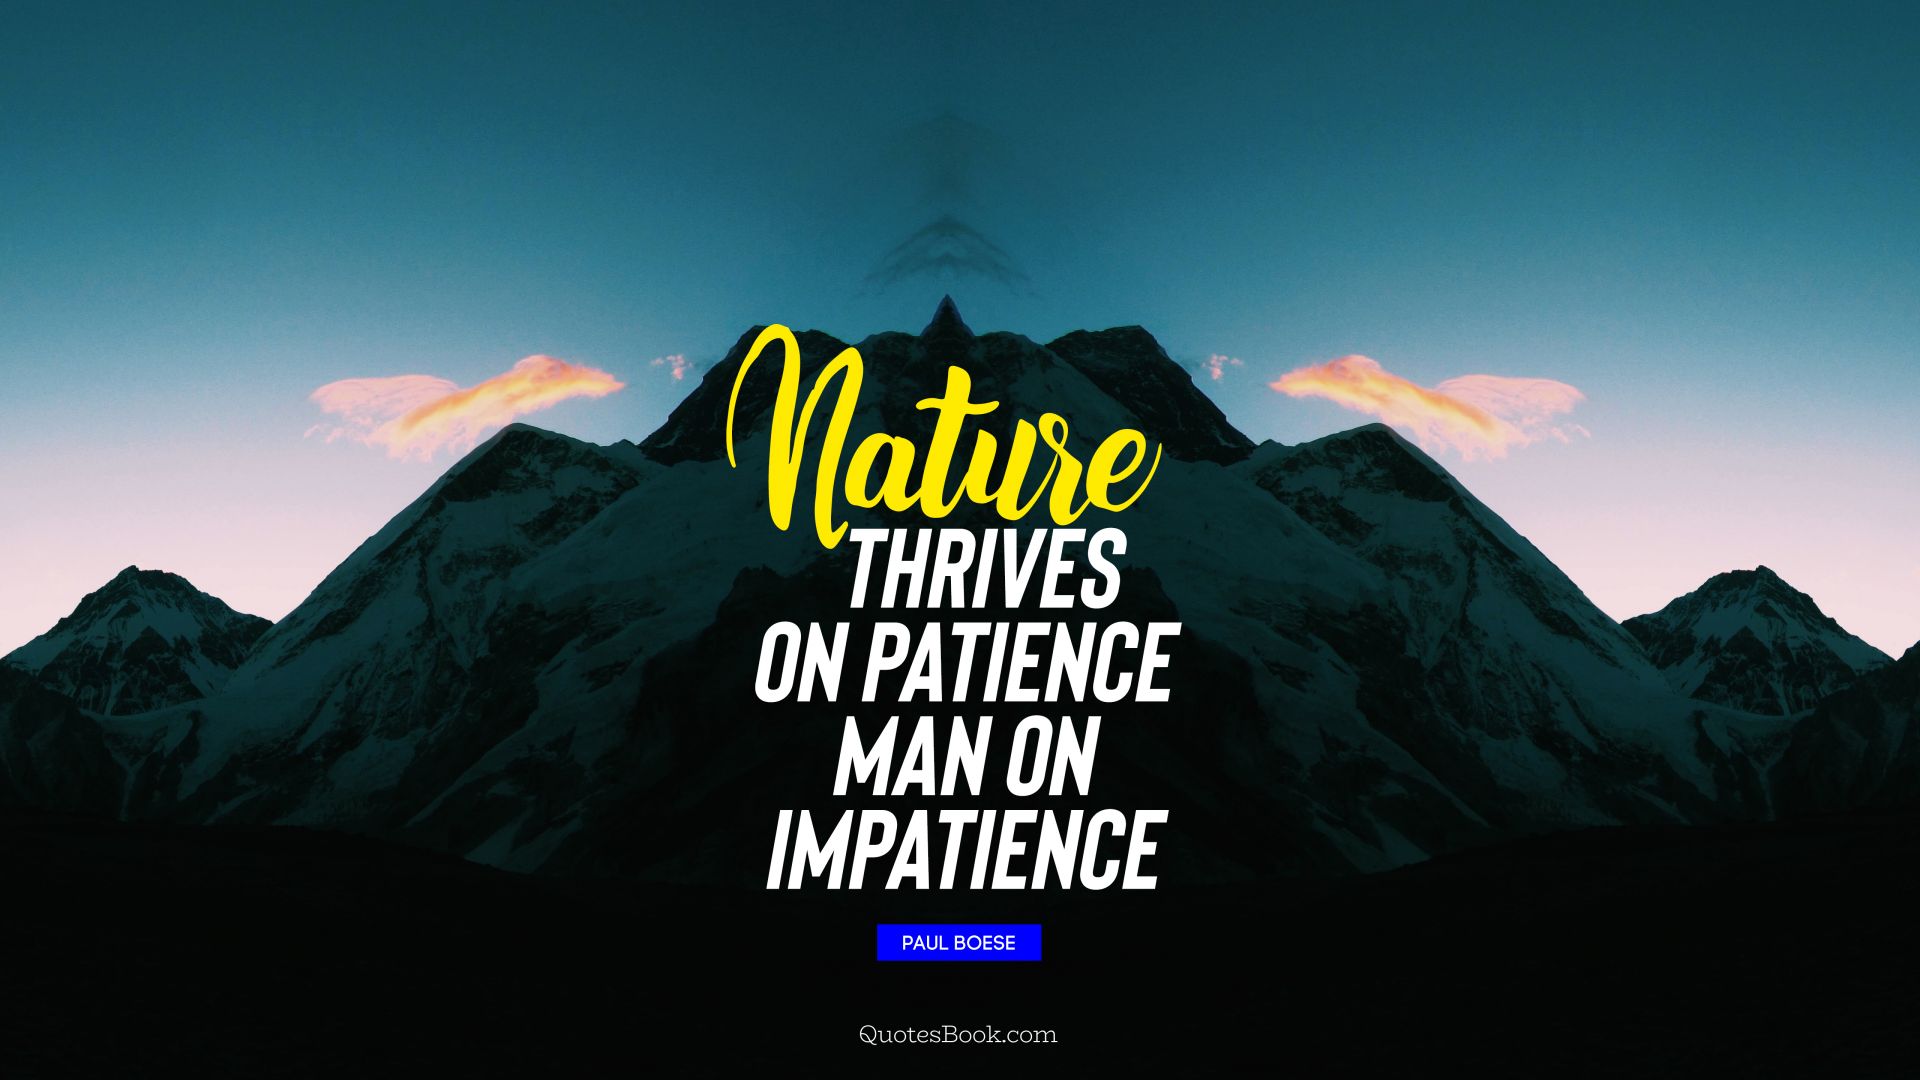 Nature thrives on patience man on impatience. - Quote by Paul Boese